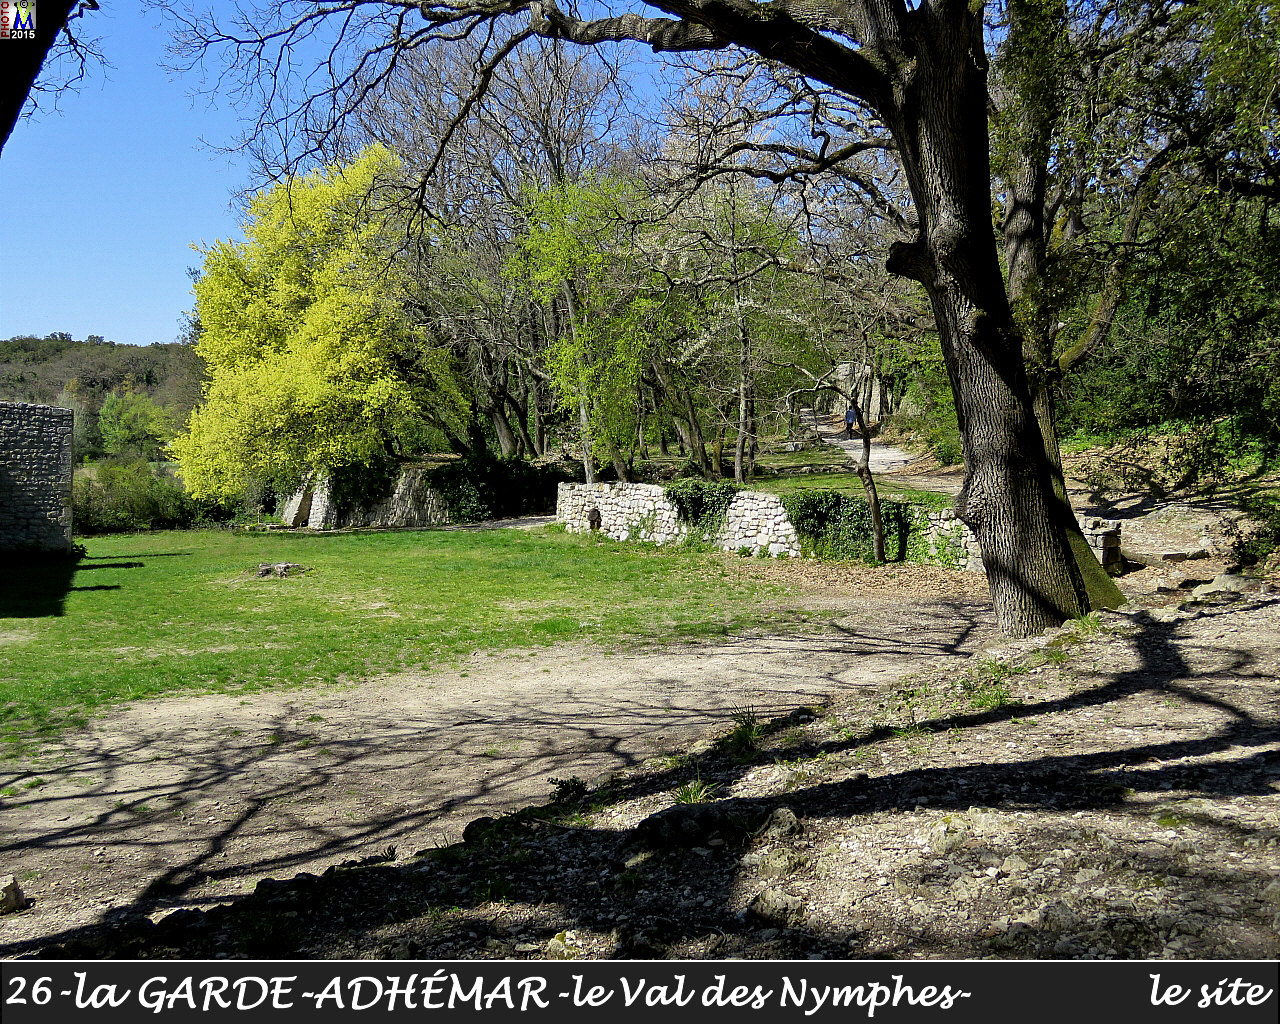 26GARDE-ADHEMARzVAL-NYMPHES_site_100.jpg